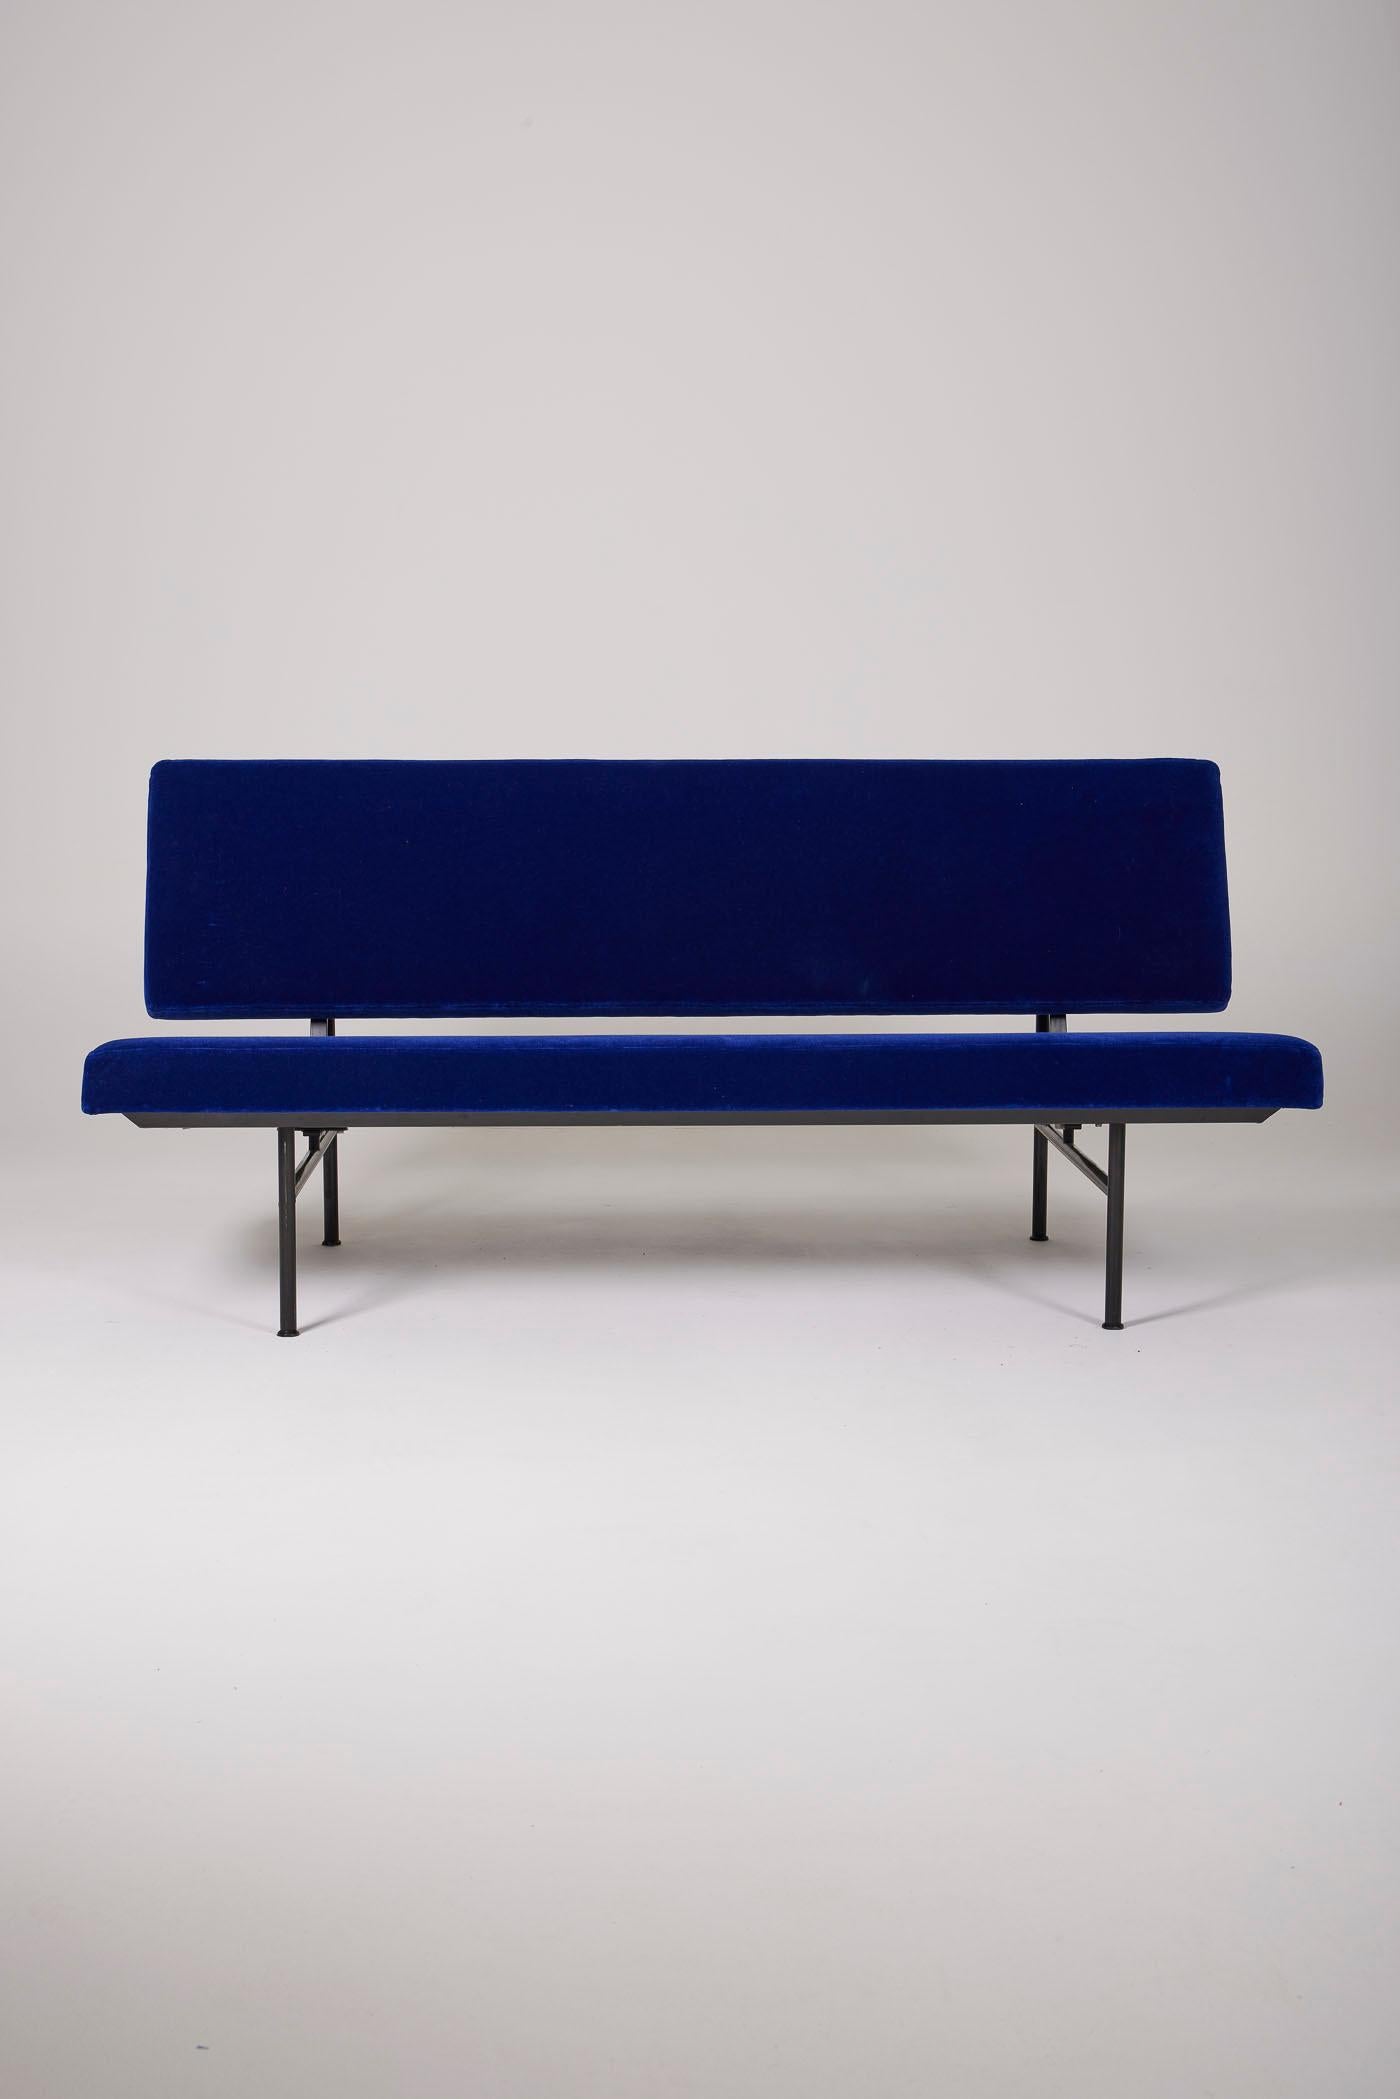 2-seater sofa by designer André Robert Cordemeyer for Gispen, from the 1960s. The frame is in black lacquered metal. The backrest and seat have been reupholstered in blue velvet. In perfect condition.
DV376